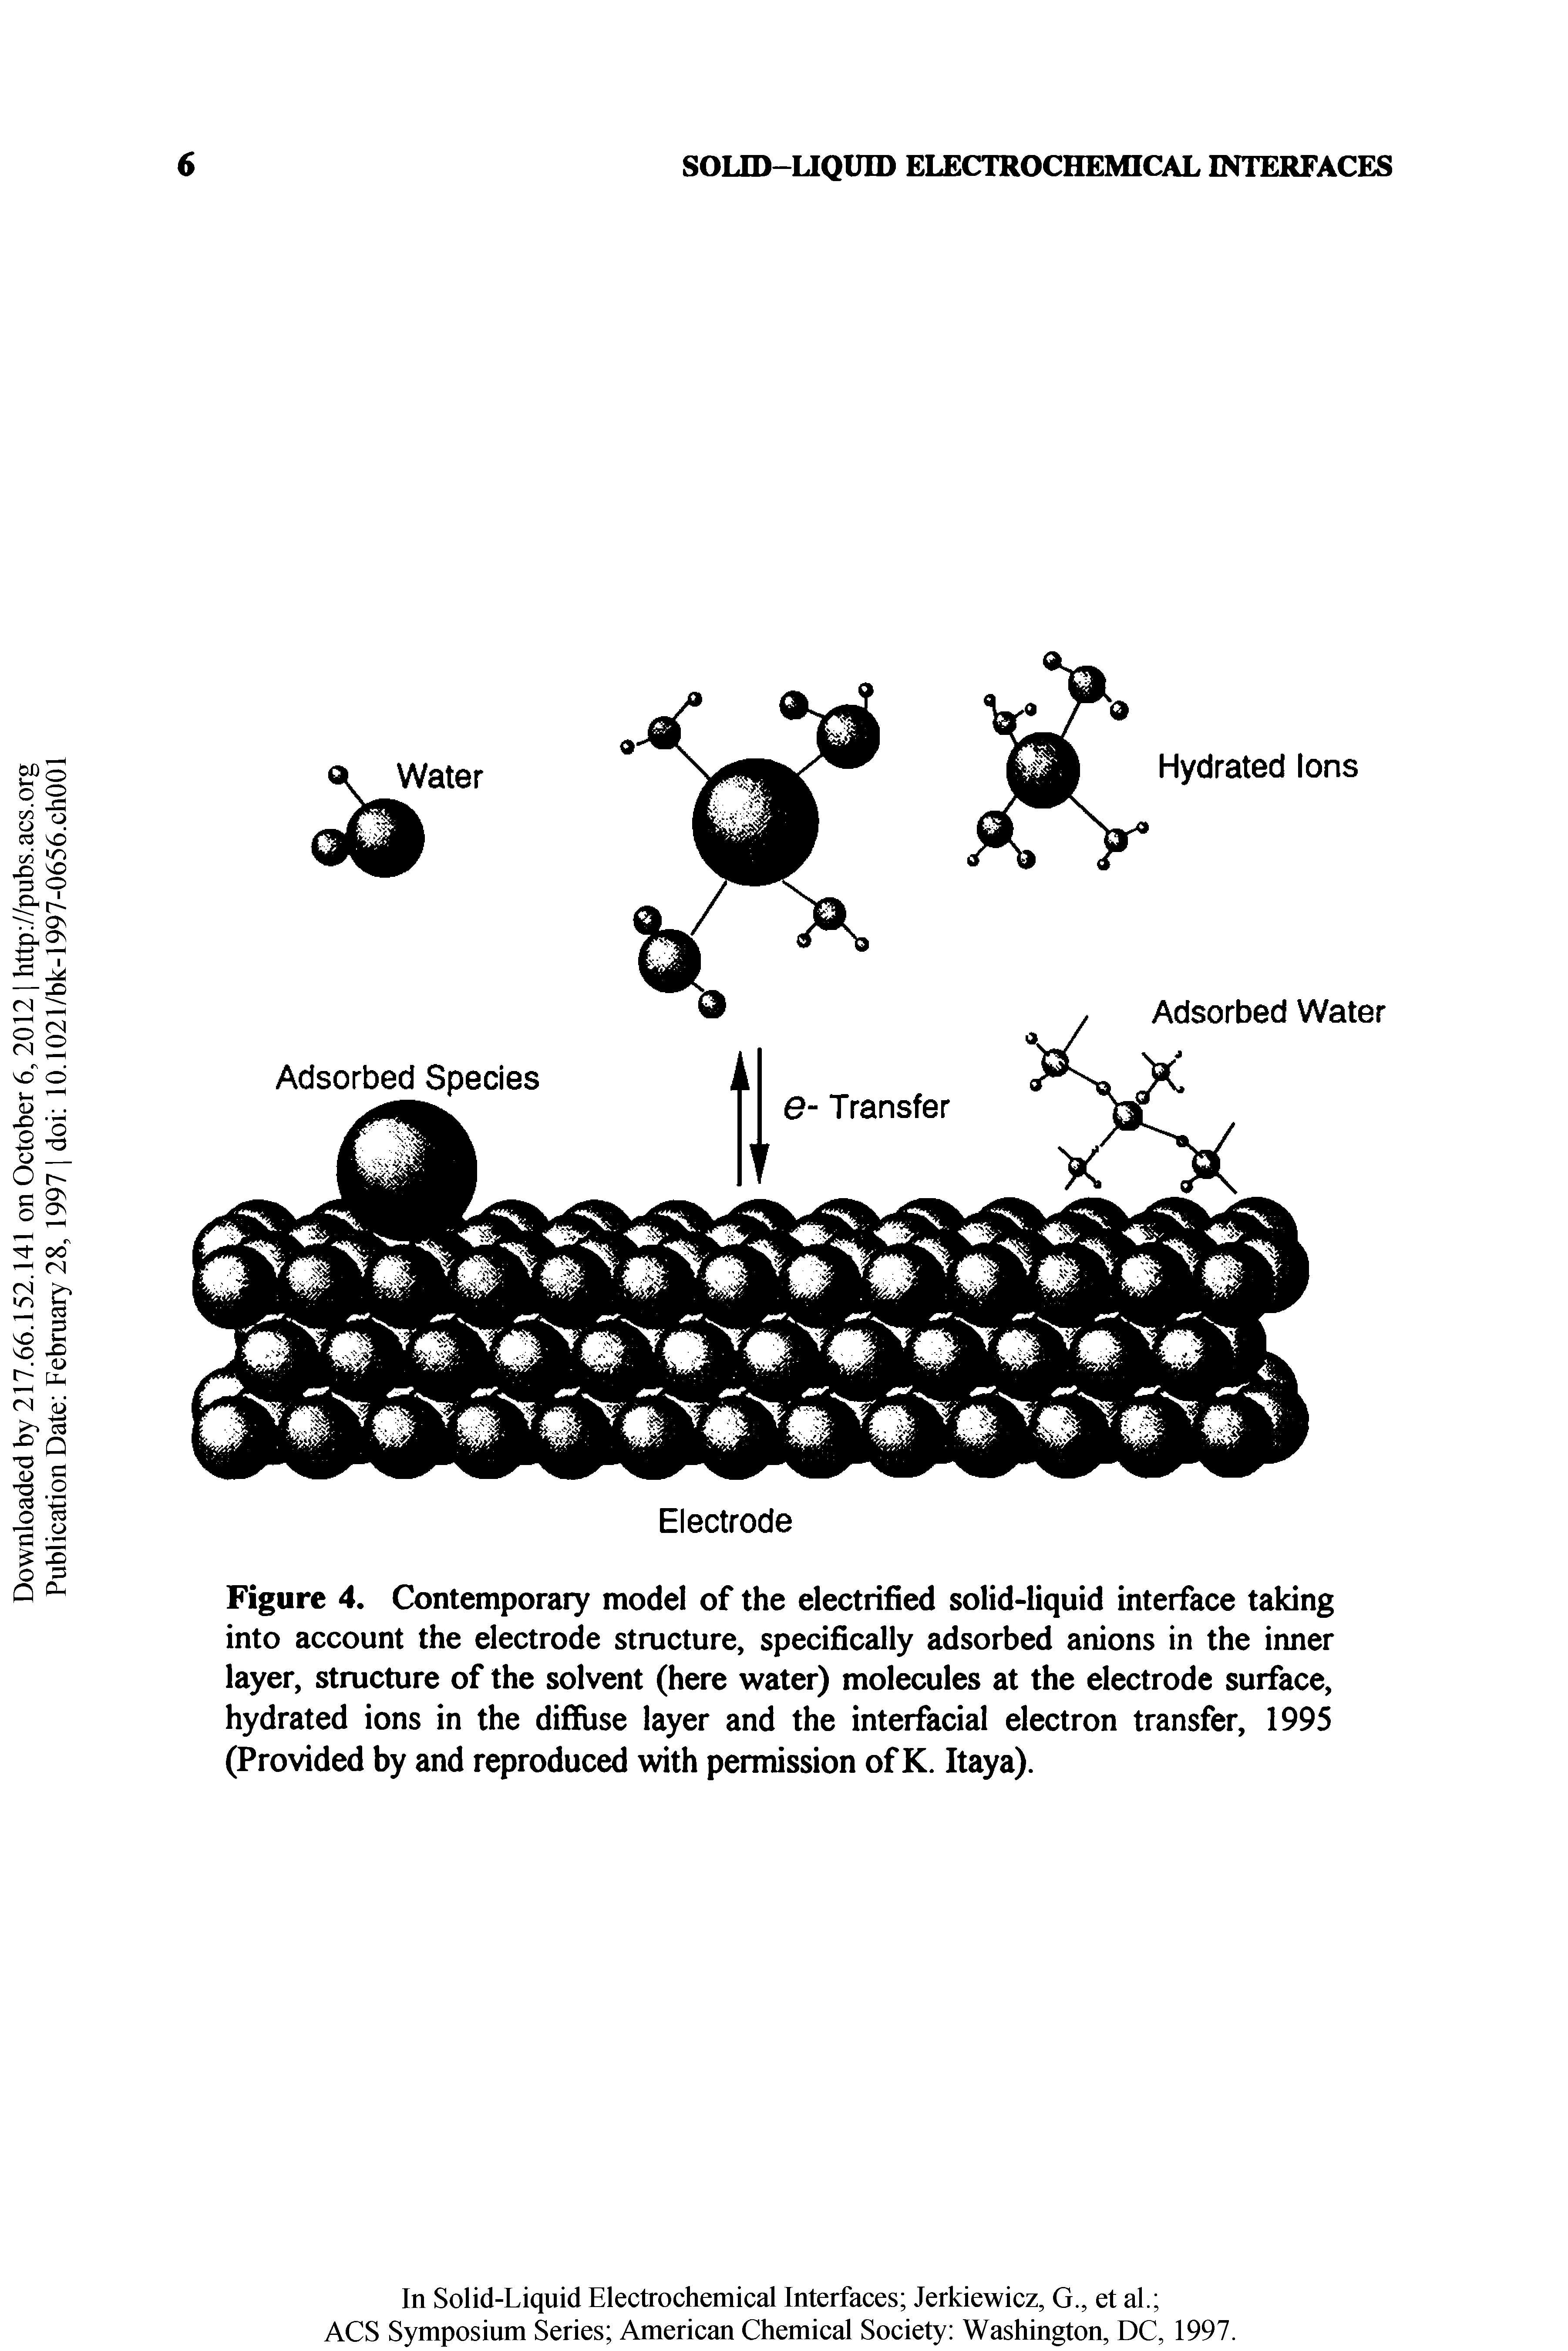 Figure 4. Contemporary model of the electrified solid-liquid interface taking into account the electrode structure, specifically adsorbed anions in the inner layer, structure of the solvent (here water) molecules at the electrode surface, hydrated ions in the diffuse layer and the interfacial electron transfer, 1995 (Provided by and reproduced with permission of K. Itaya).